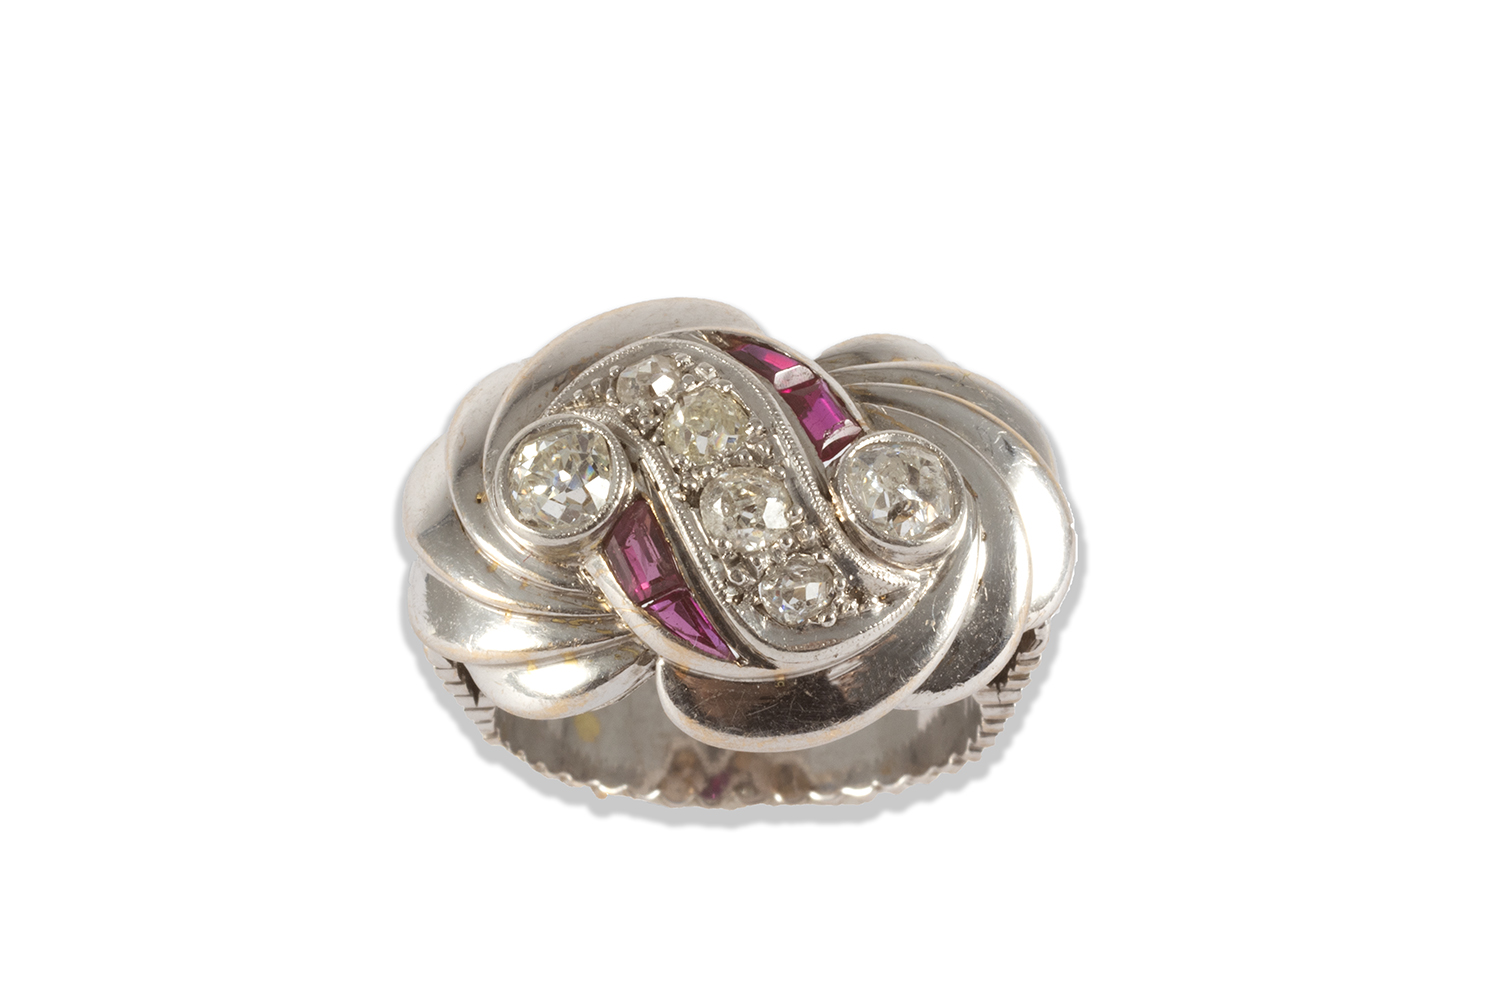 Chevaliere ring in white gold, old brilliant cut diamonds and ruby similes.